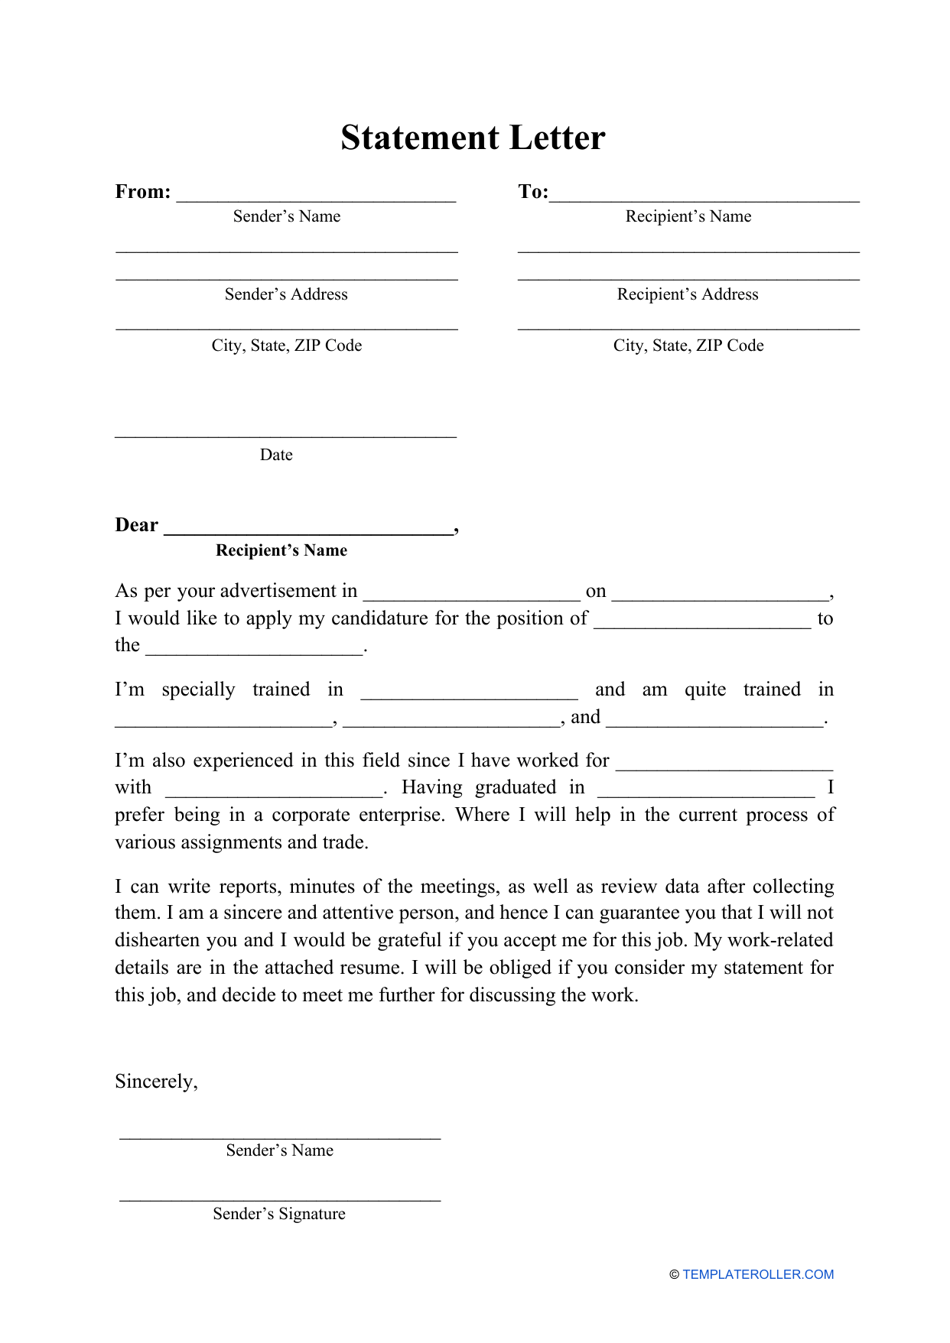 Preview of statement letter template